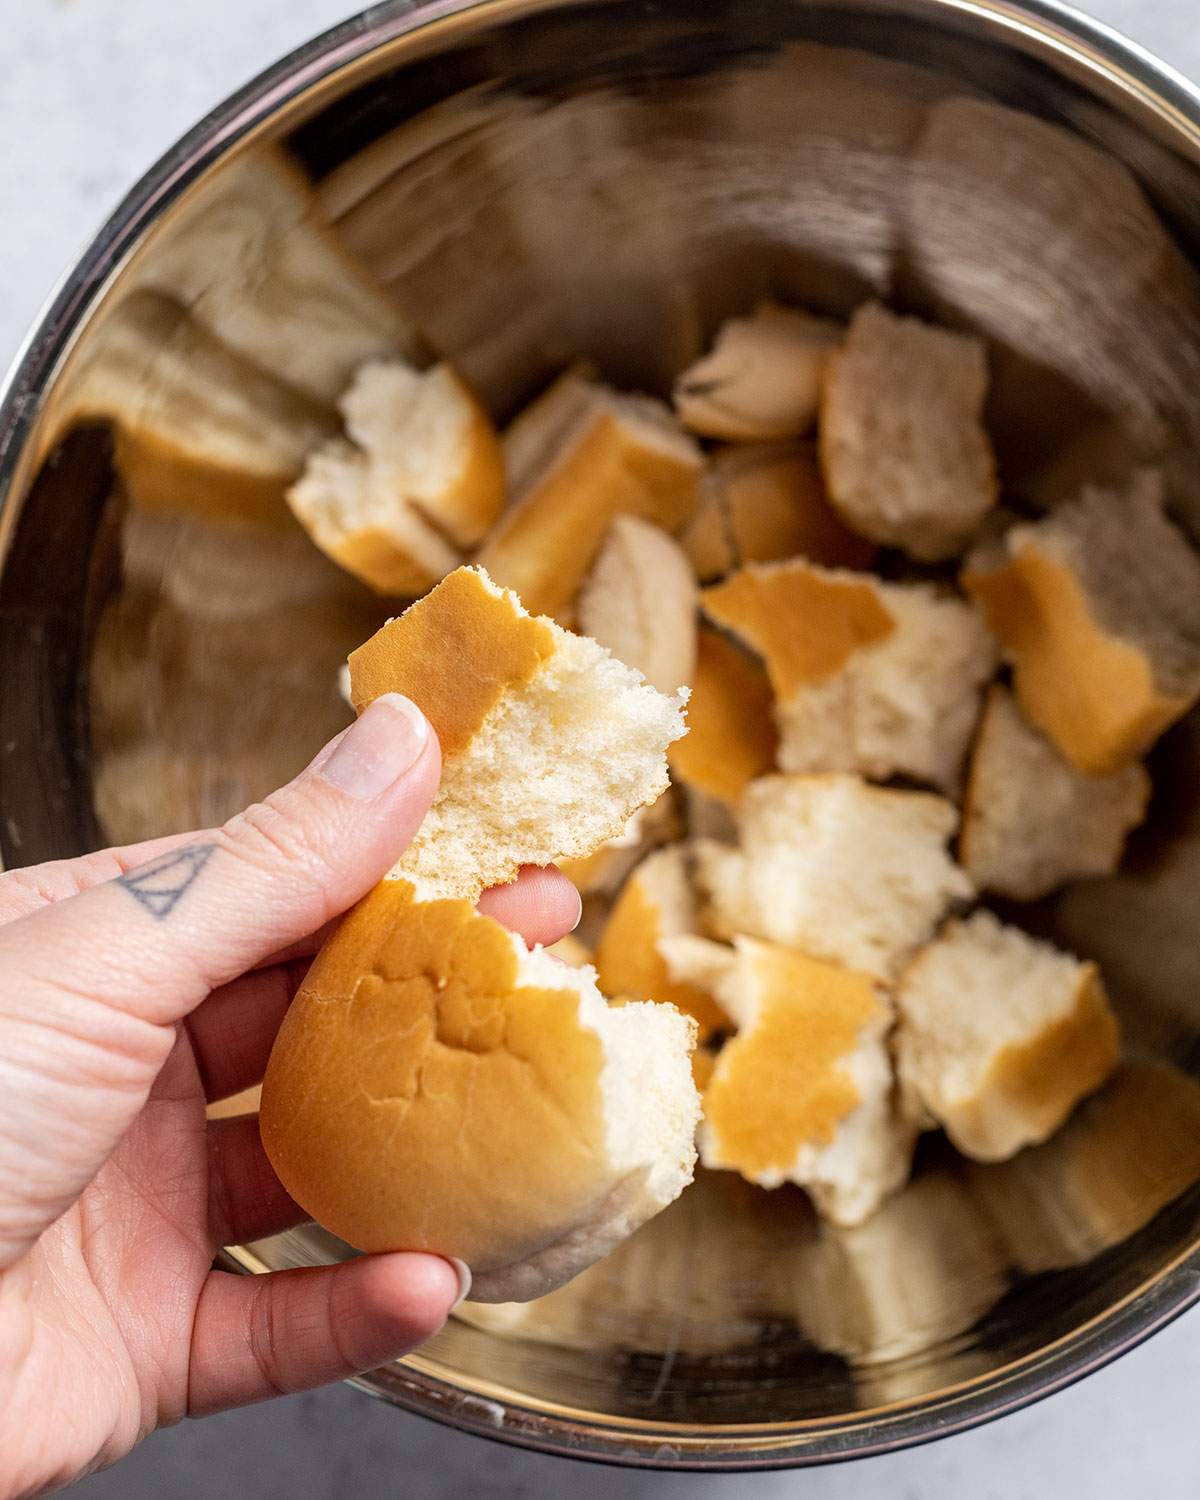 A hand ripping vegan bread rolls into a large mixing bowl.